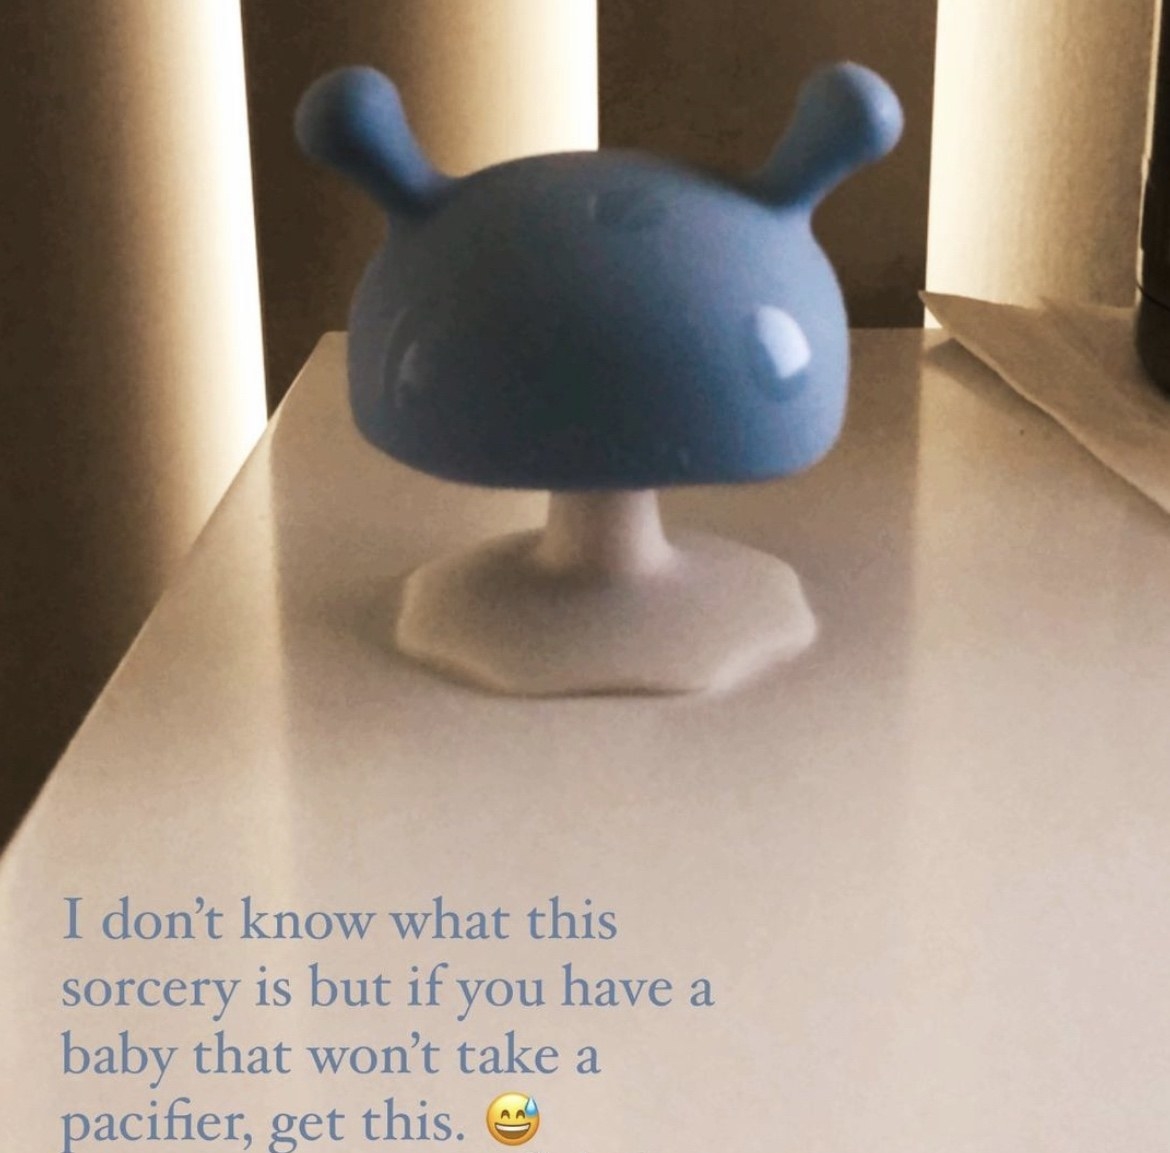 reviewer's photo of the blue mushroom-shaped pacifier